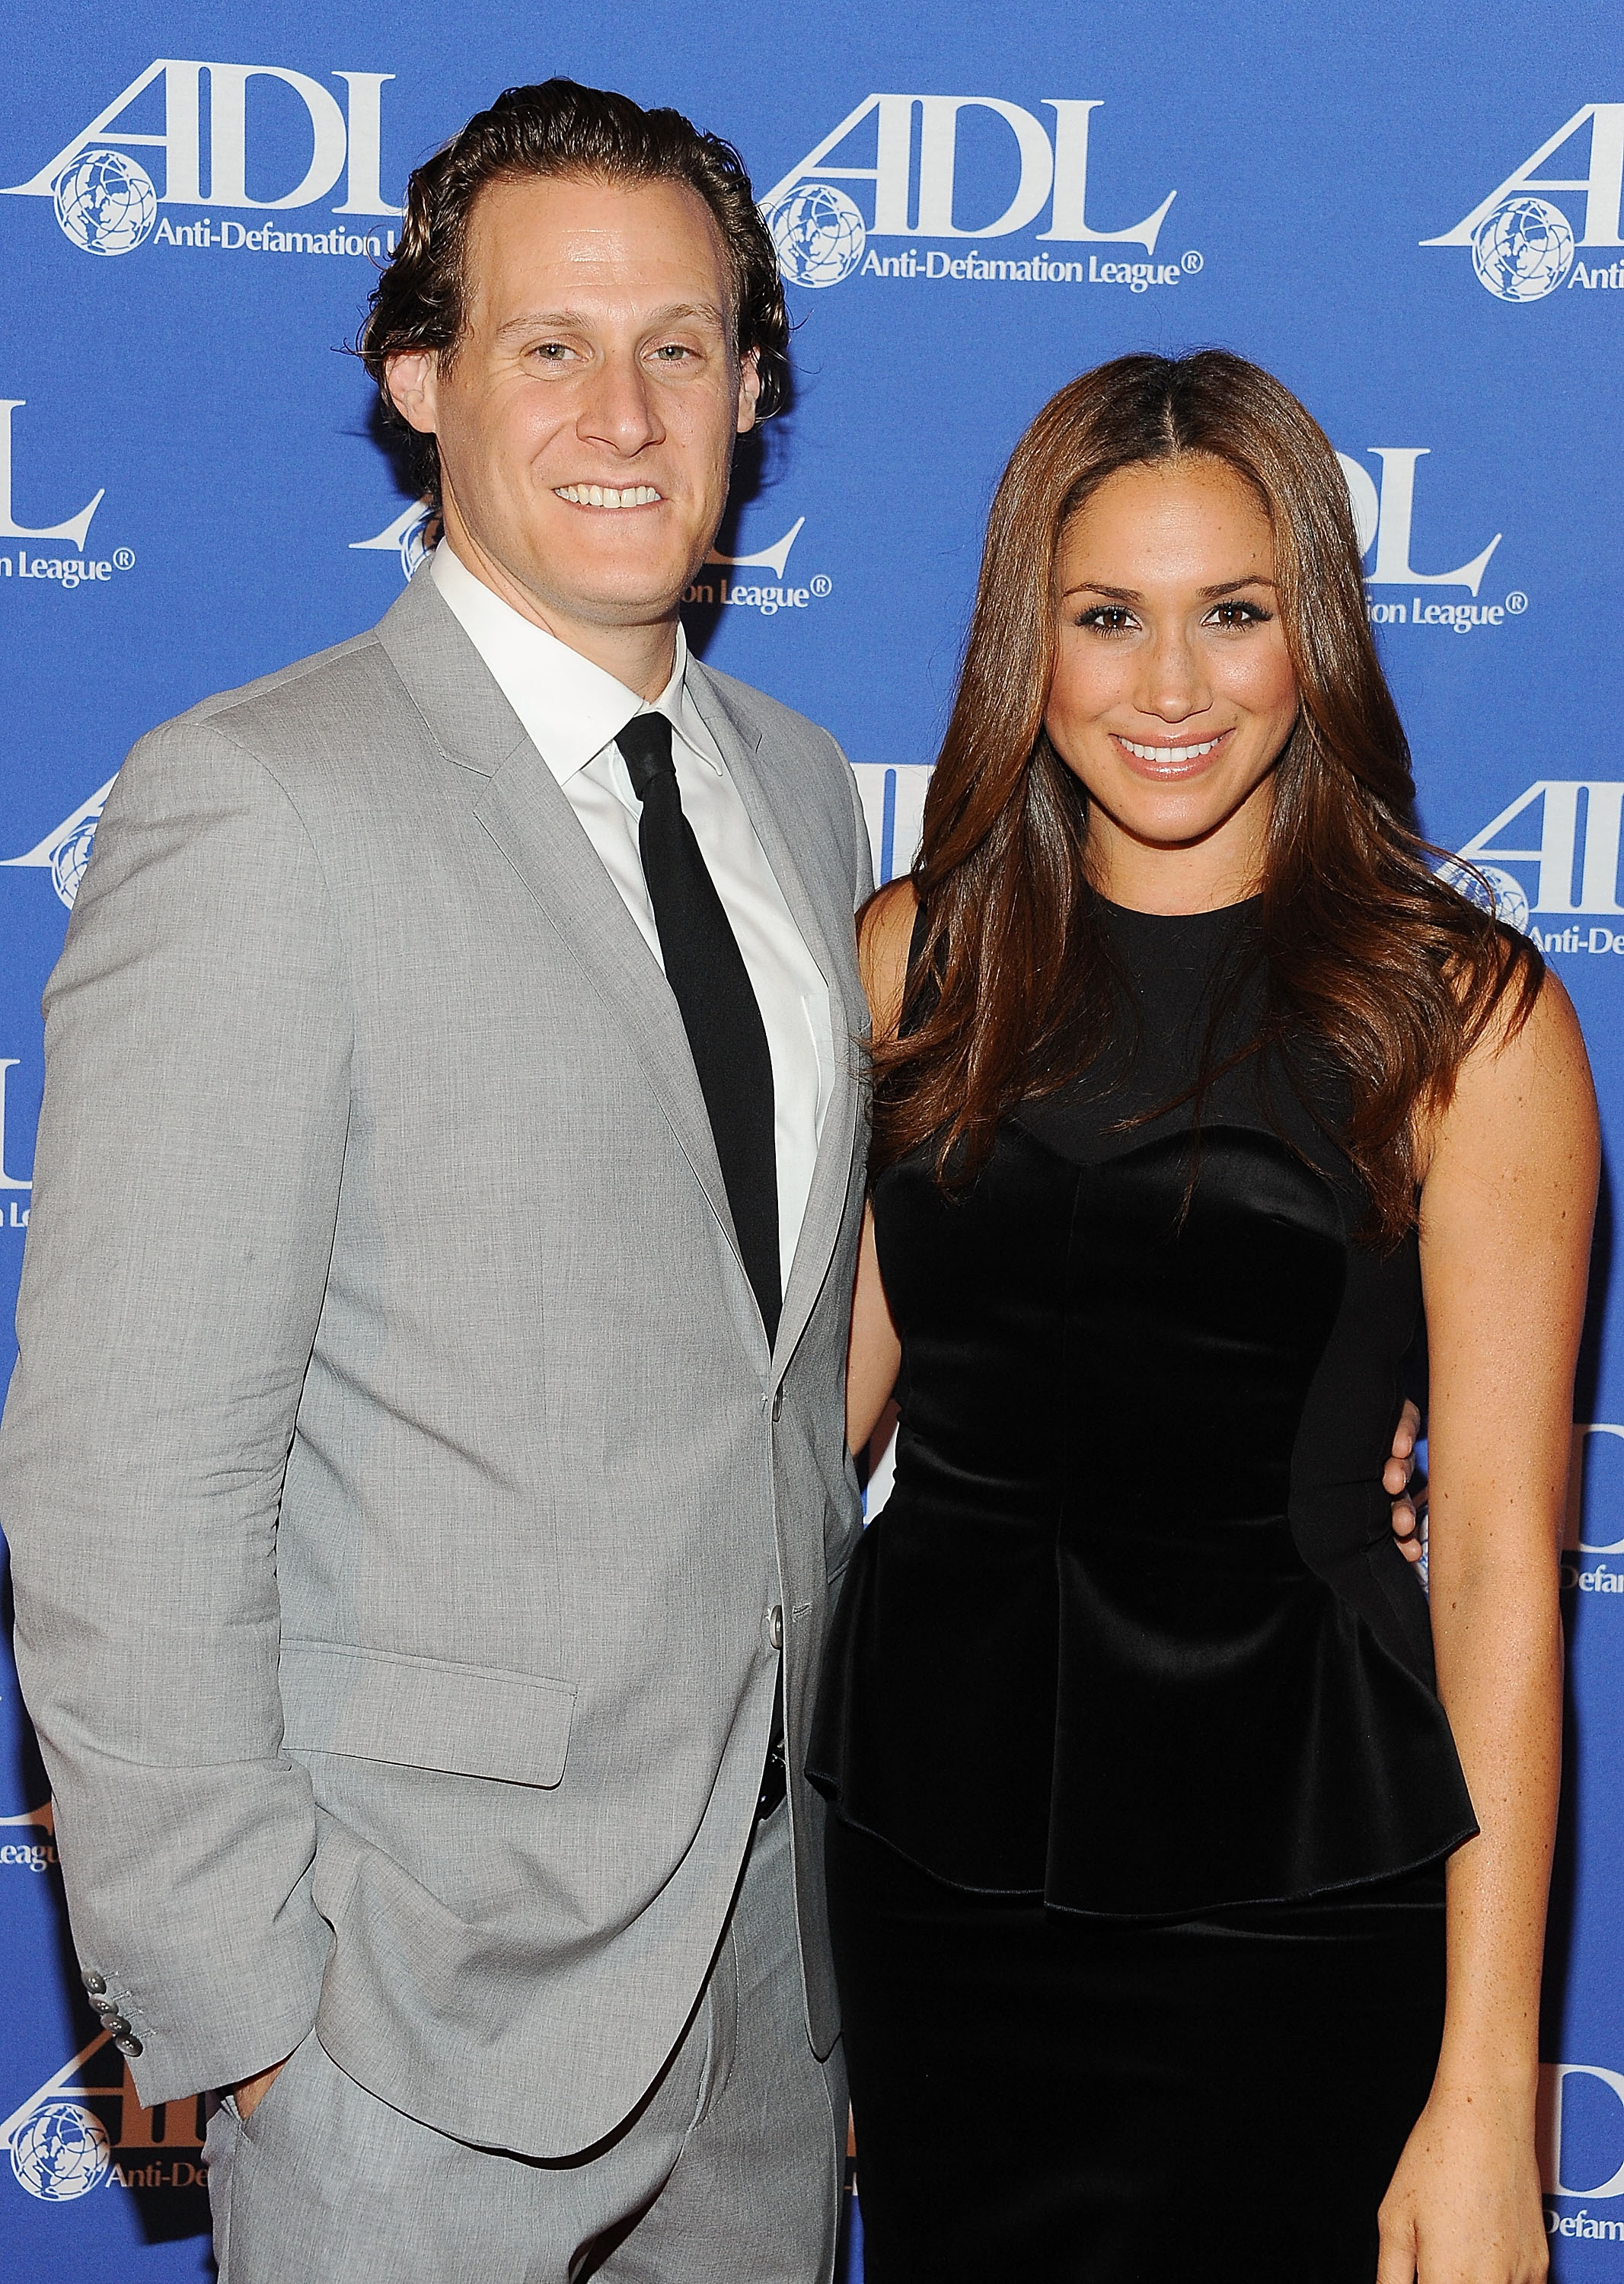 Trevor Engelson and Meghan Markle arrives at the Anti-Defamation League Entertainment Industry Awards Dinner at The Beverly Hilton hotel on October 11, 2011, in Beverly Hills, California. | Source: Getty Images